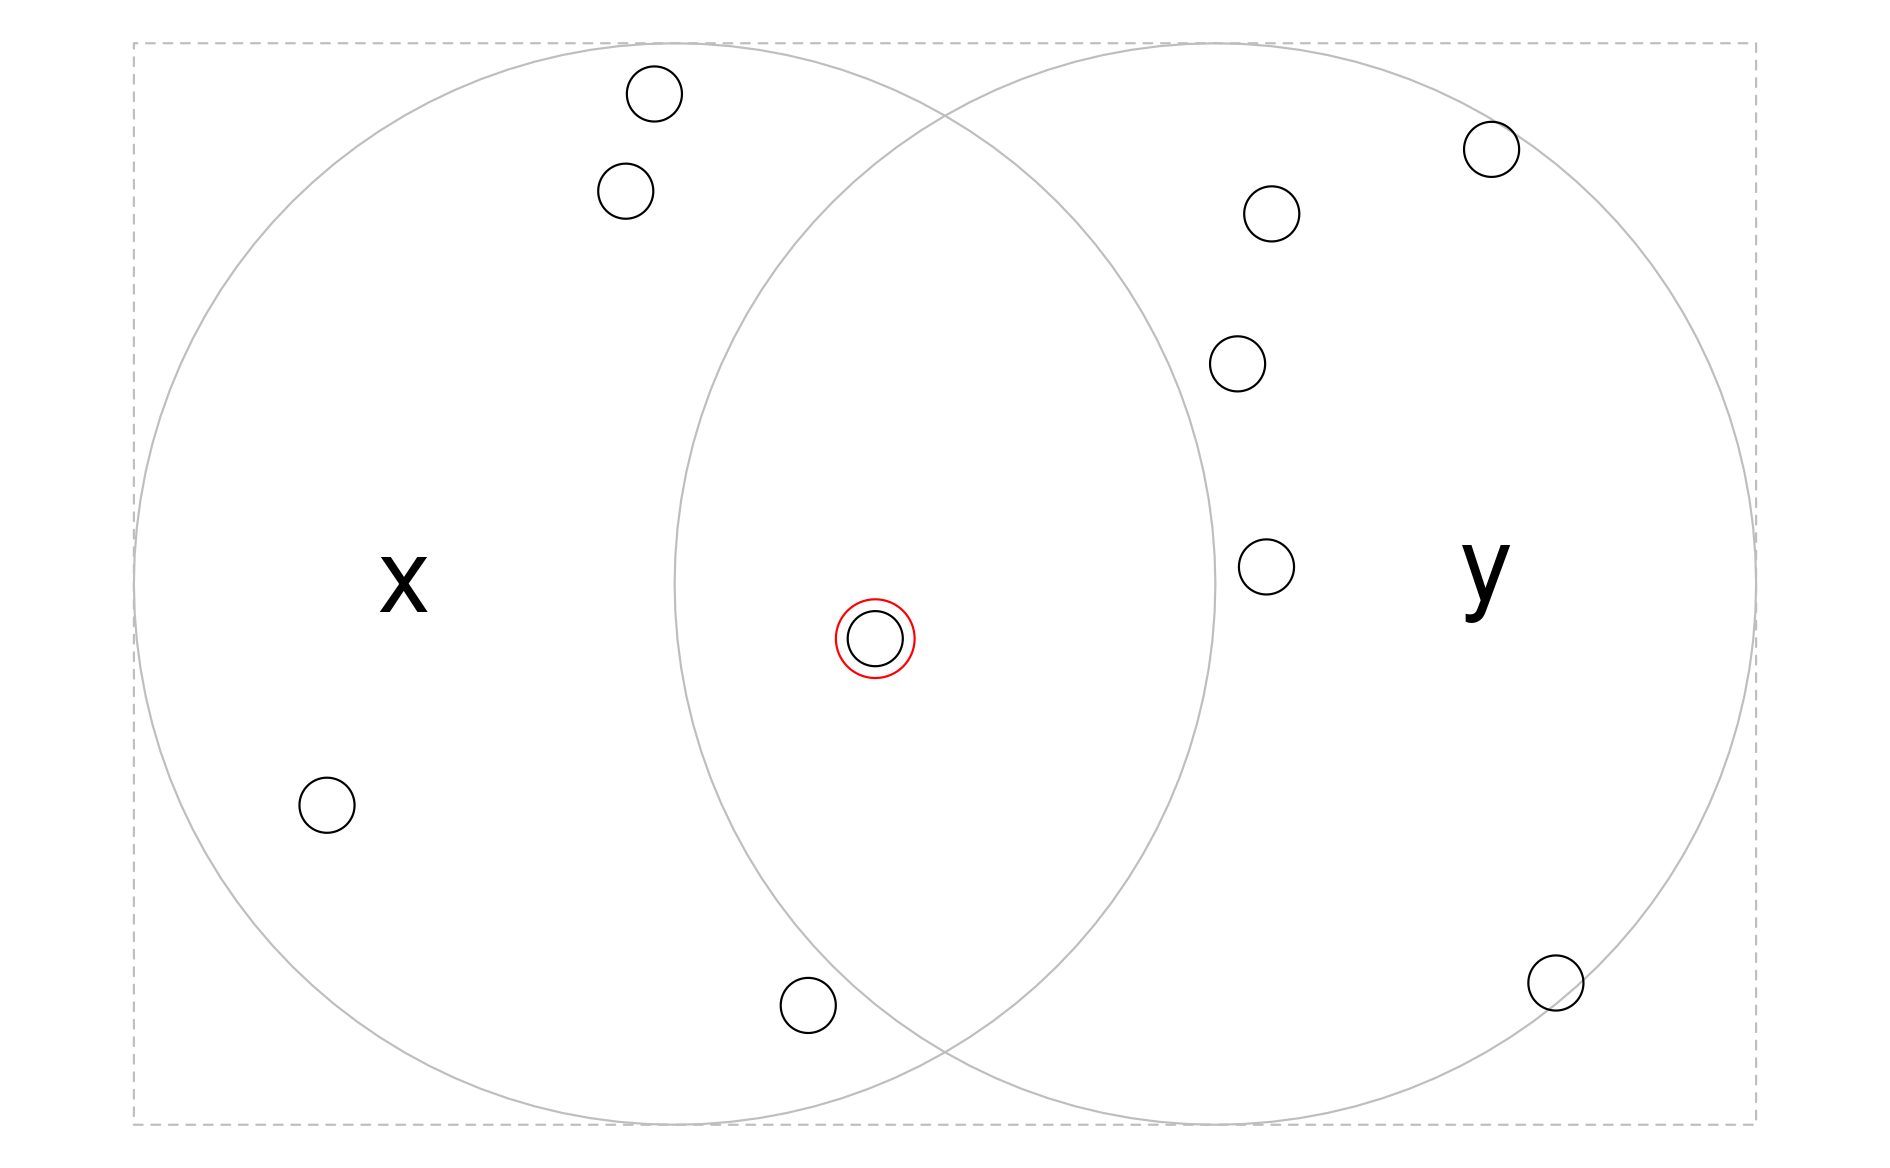 Randomly distributed points within the bounding box enclosing circles x and y. The point that intersects with both objects x and y is highlighted.